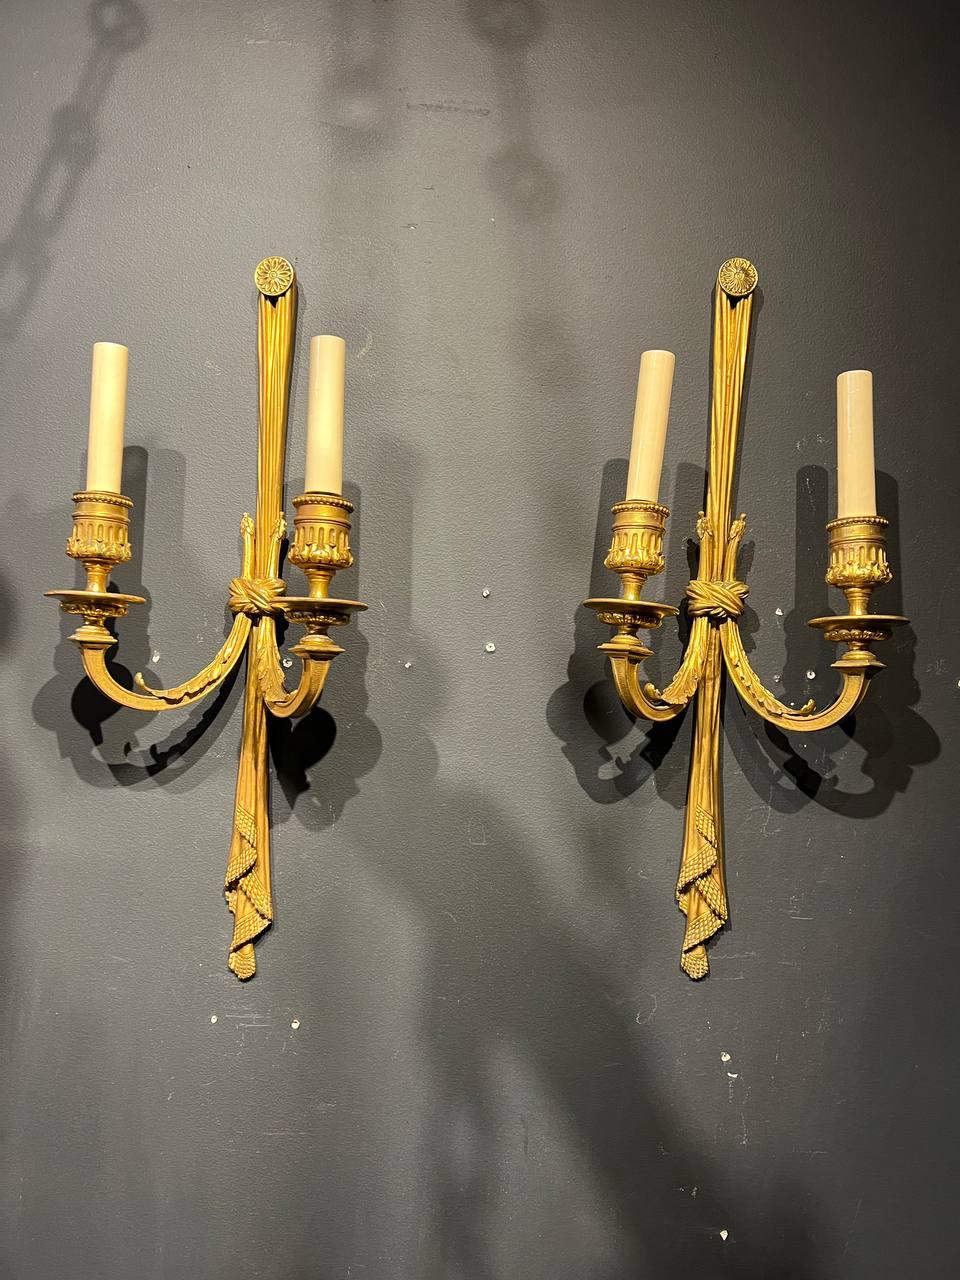 French Provincial A Pair of 1920’s Caldwell Sconces, Circa 1930s